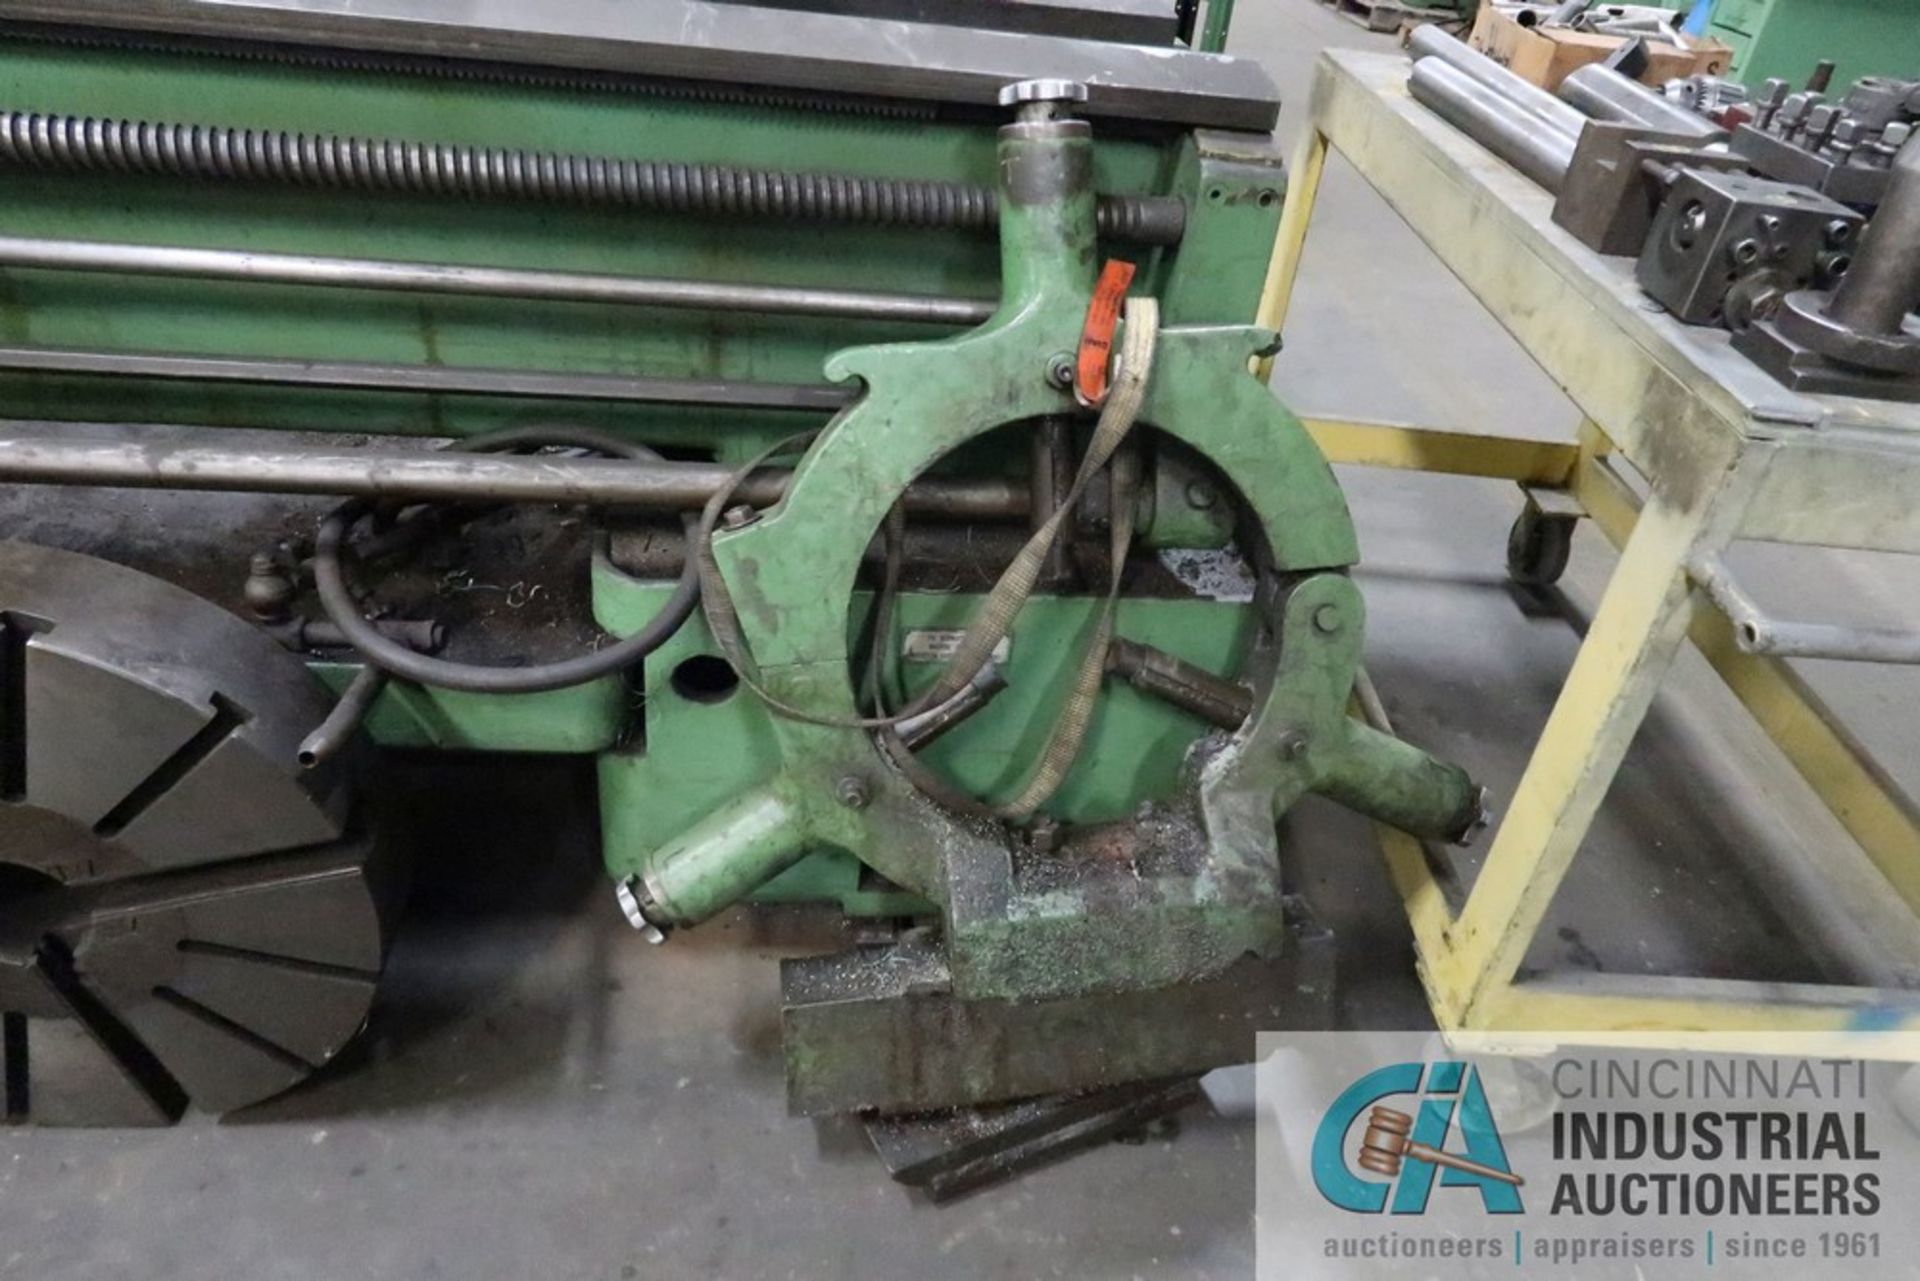 24" / 35" X 96" CLOVER GAP BED LATHE, 2-1/2" SPINDLE HOLE, 33-1/2" FACE PLATE, STEADY REST, WITH - Image 15 of 15